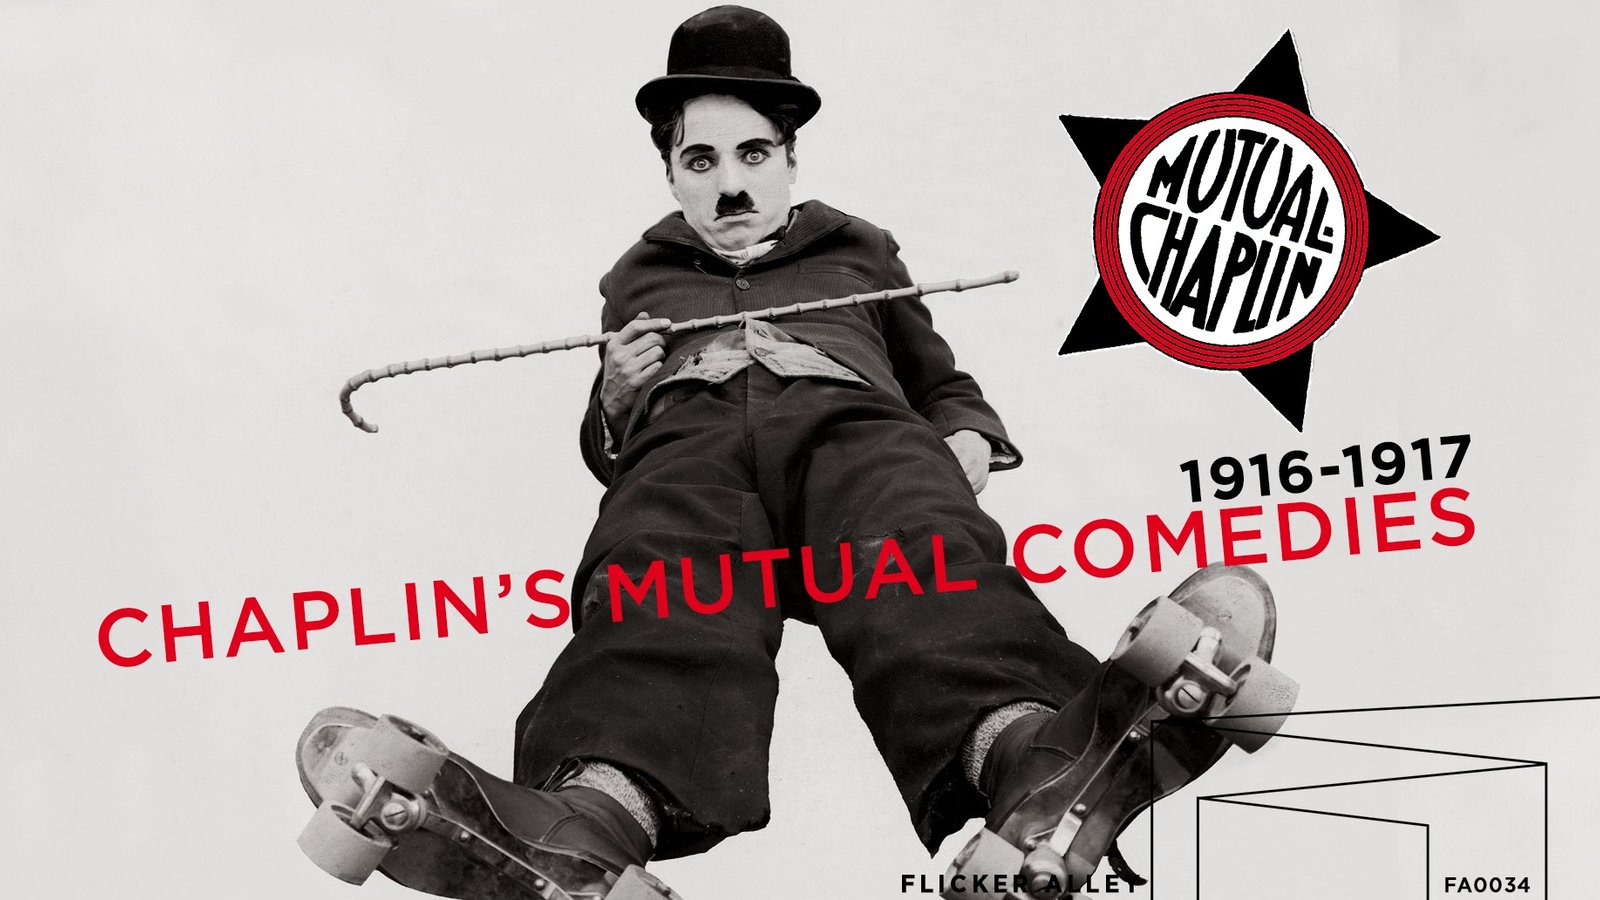 Chaplin's Mutual Comedies - A Collection of Chaplin's Finest Work